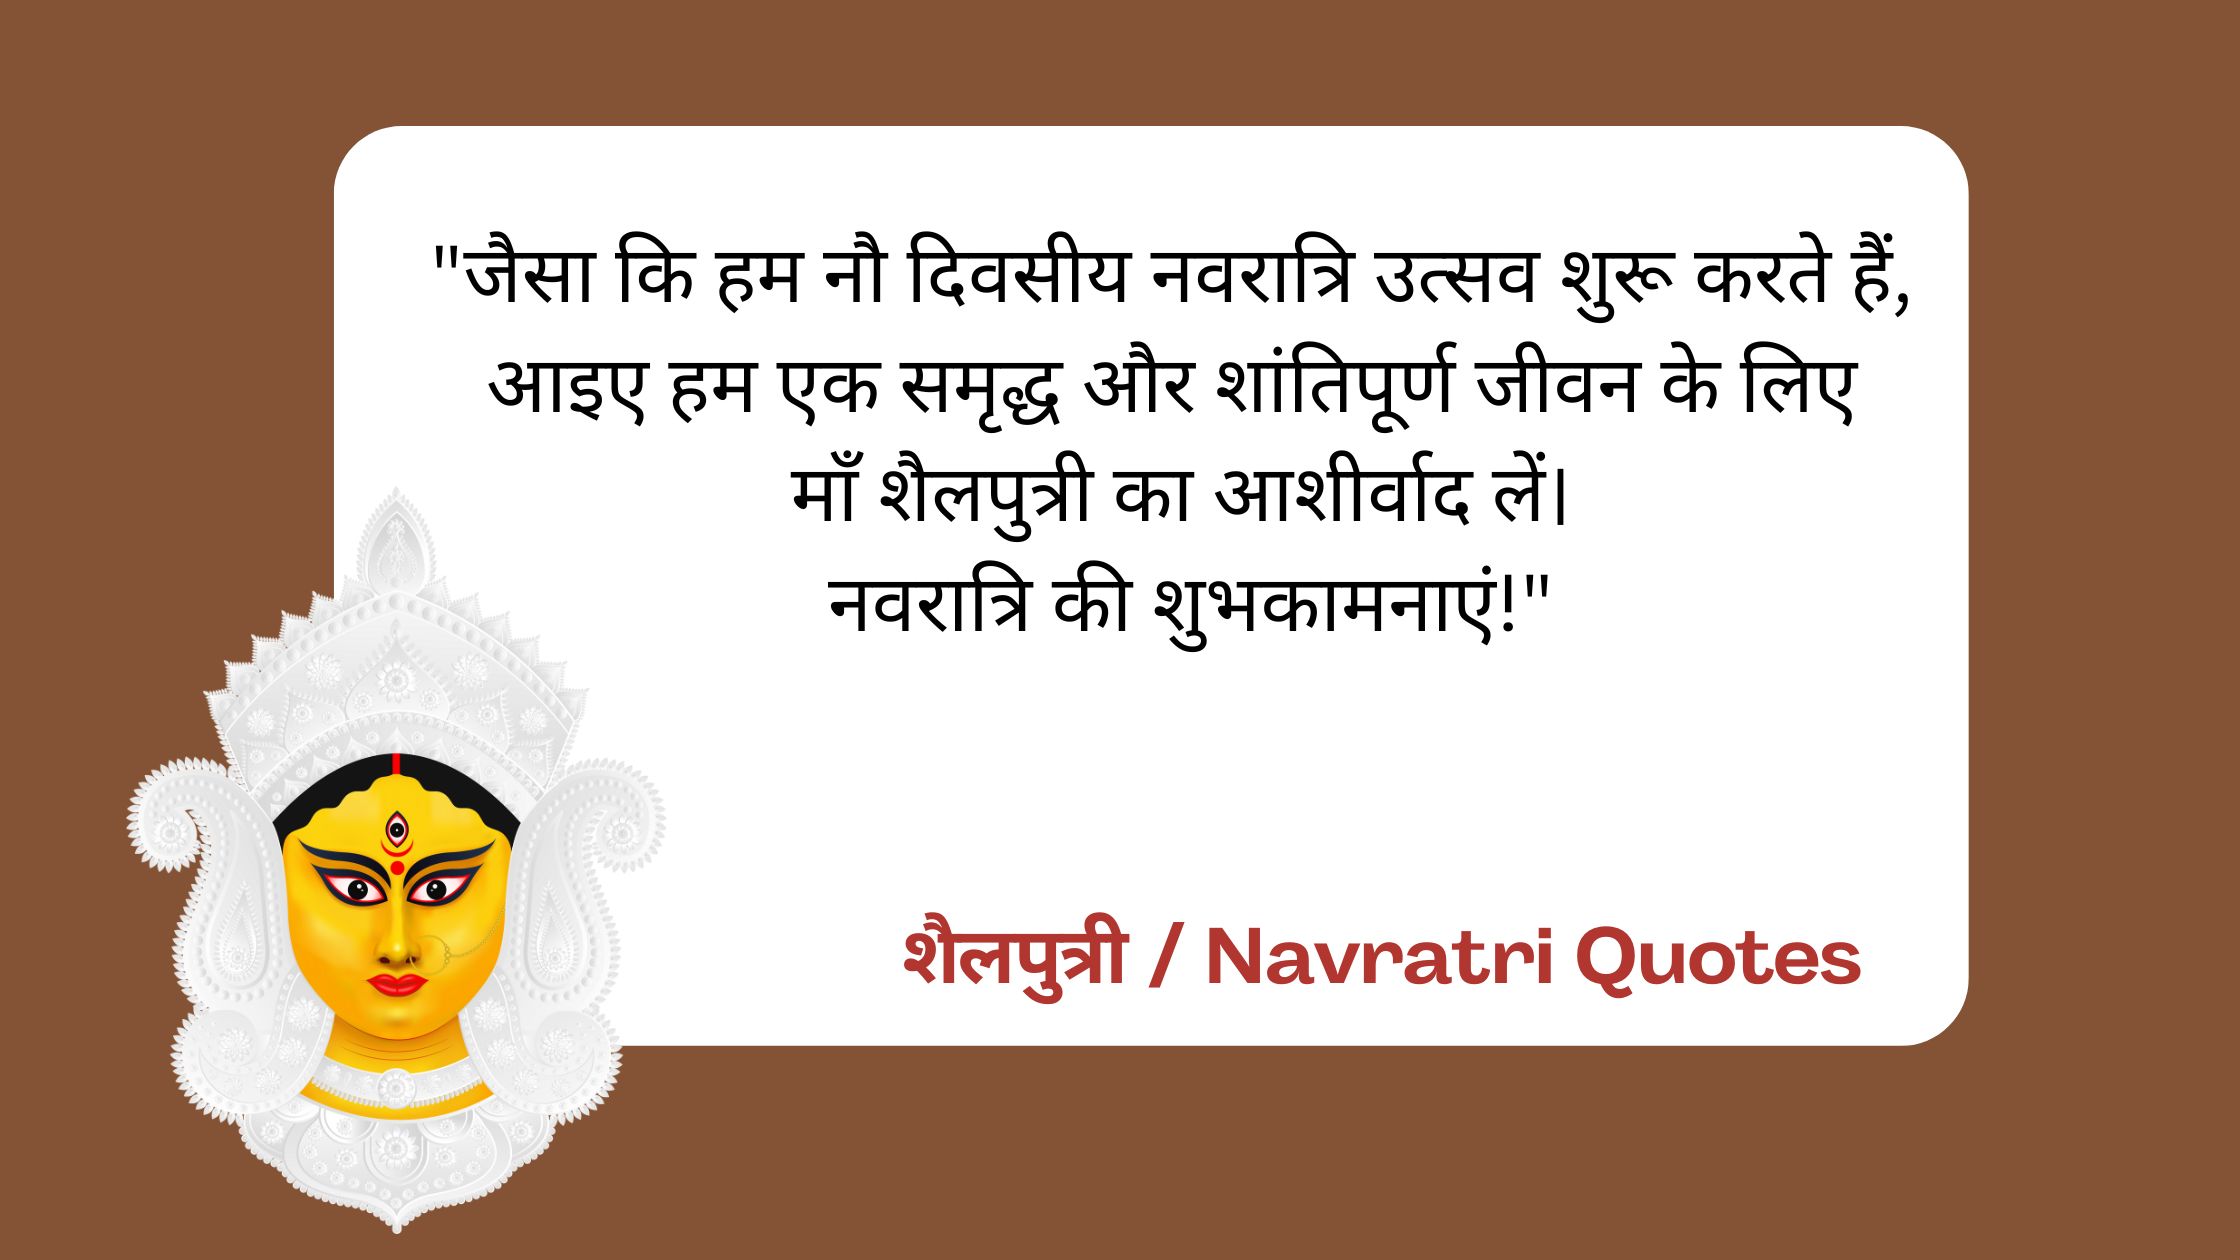  शैलपुत्री / Navratri Quotes